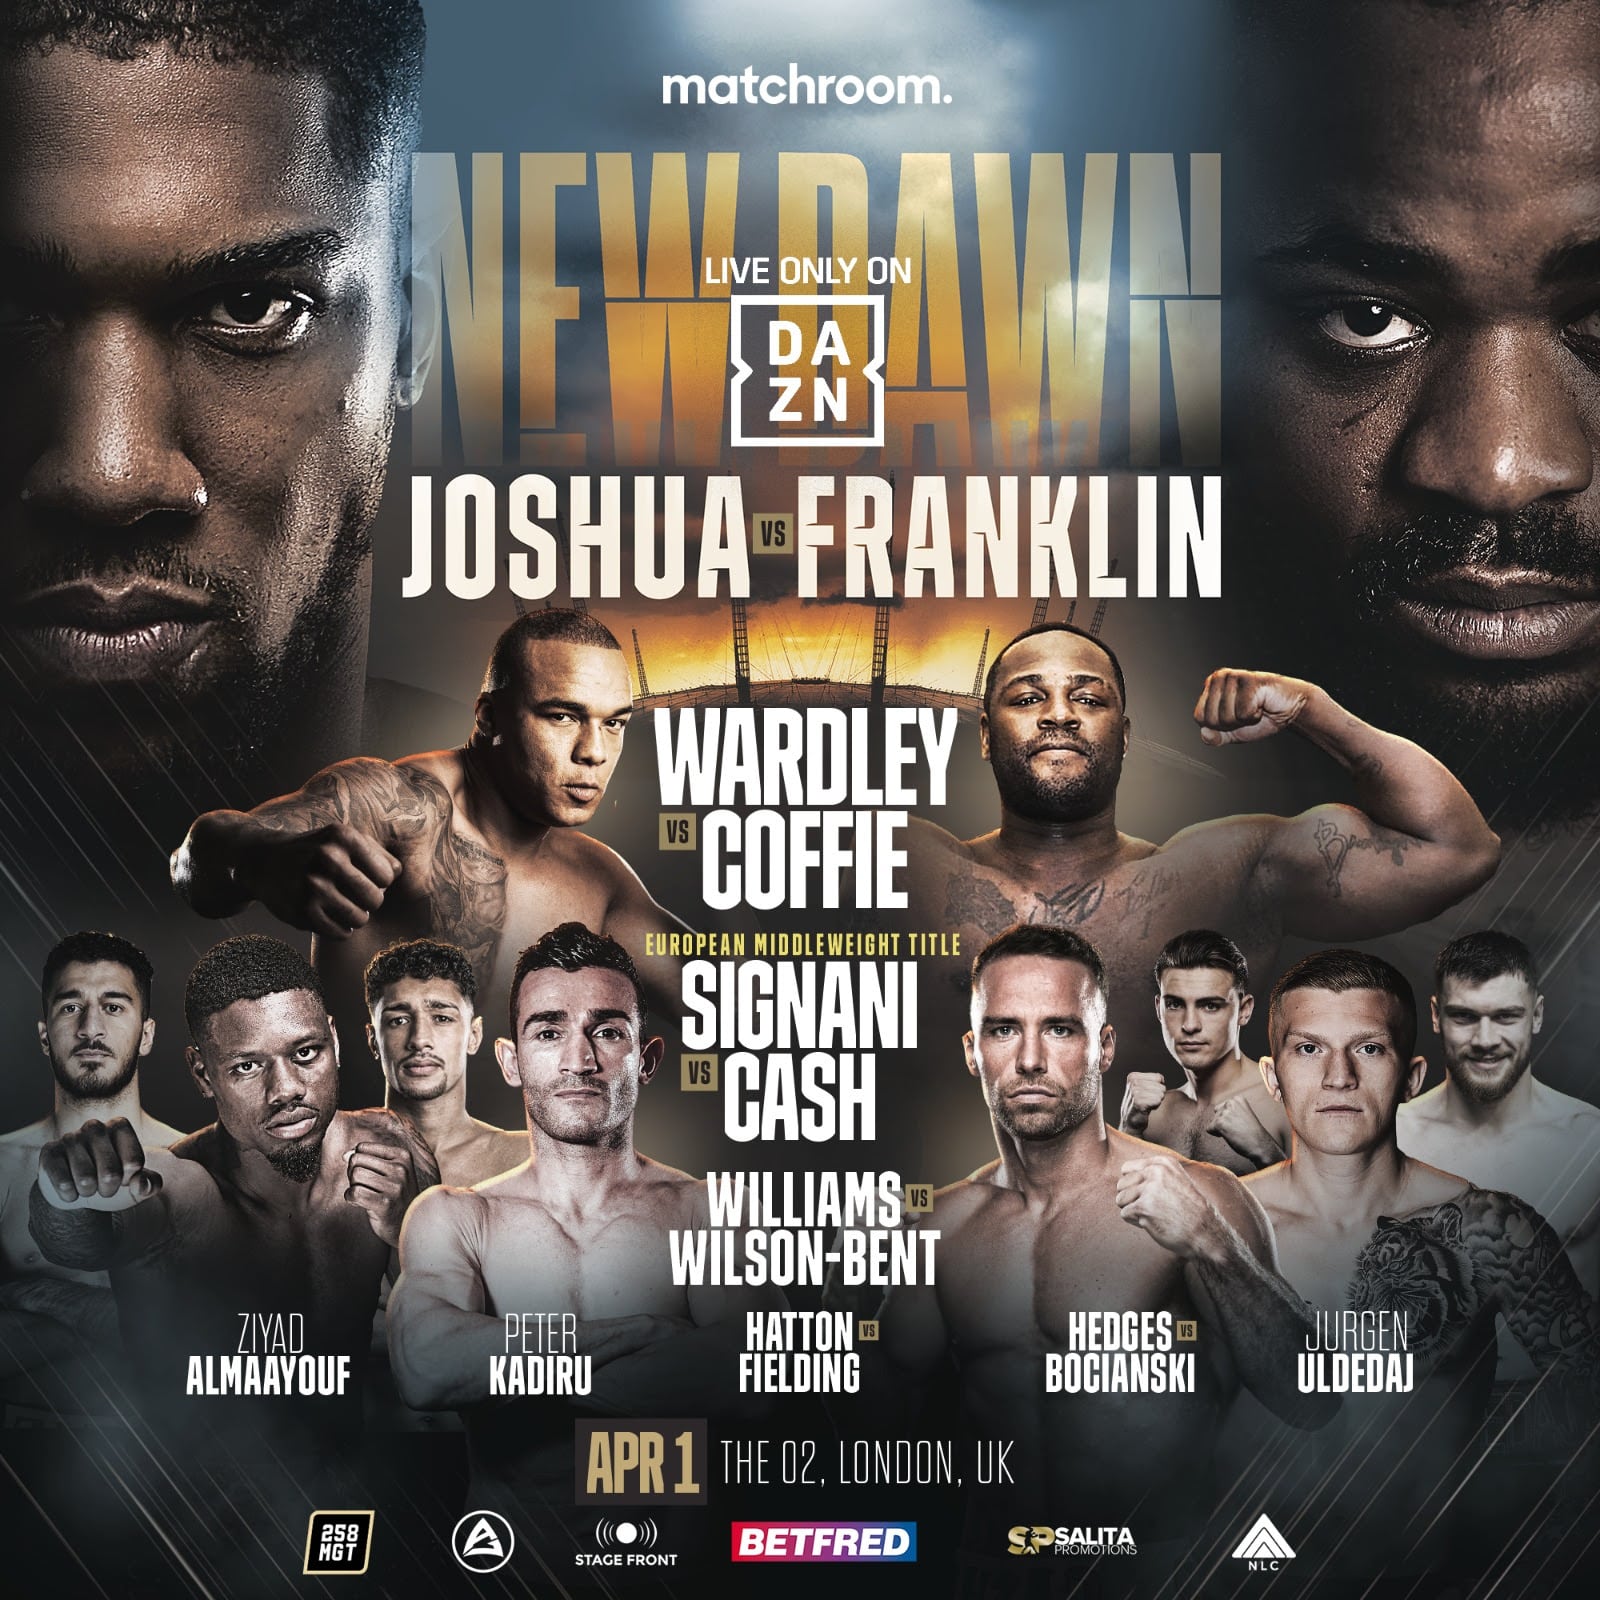 Anthony Joshua vs. Jermaine Franklin undercard – Nothing to see here